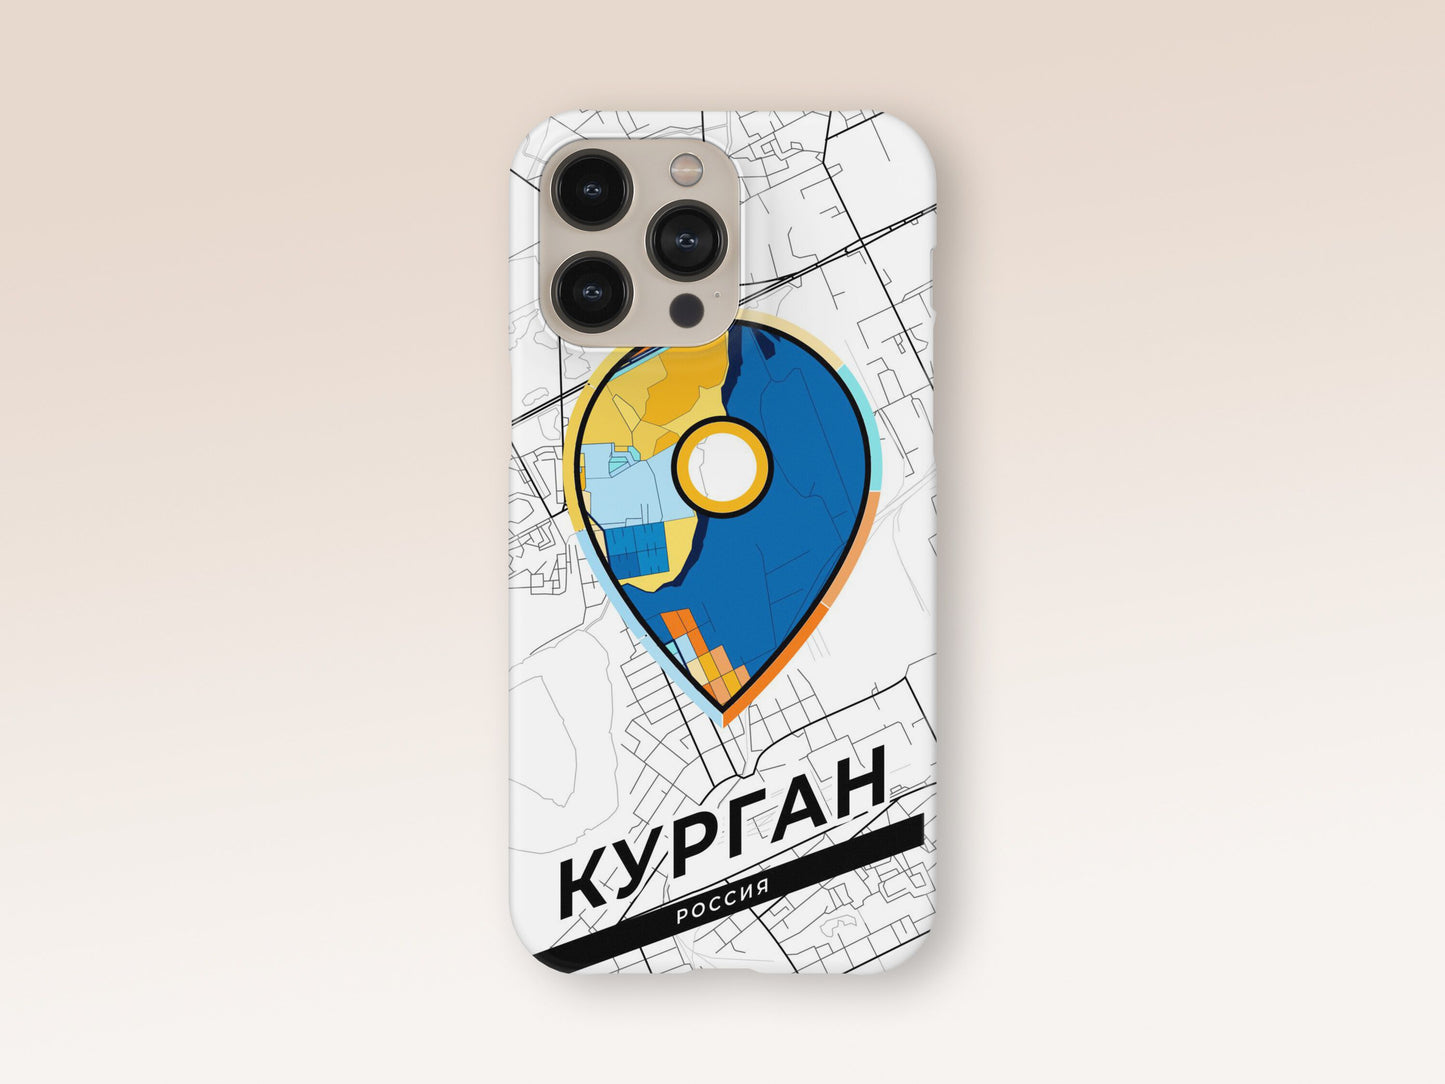 Kurgan Russia slim phone case with colorful icon. Birthday, wedding or housewarming gift. Couple match cases. 1